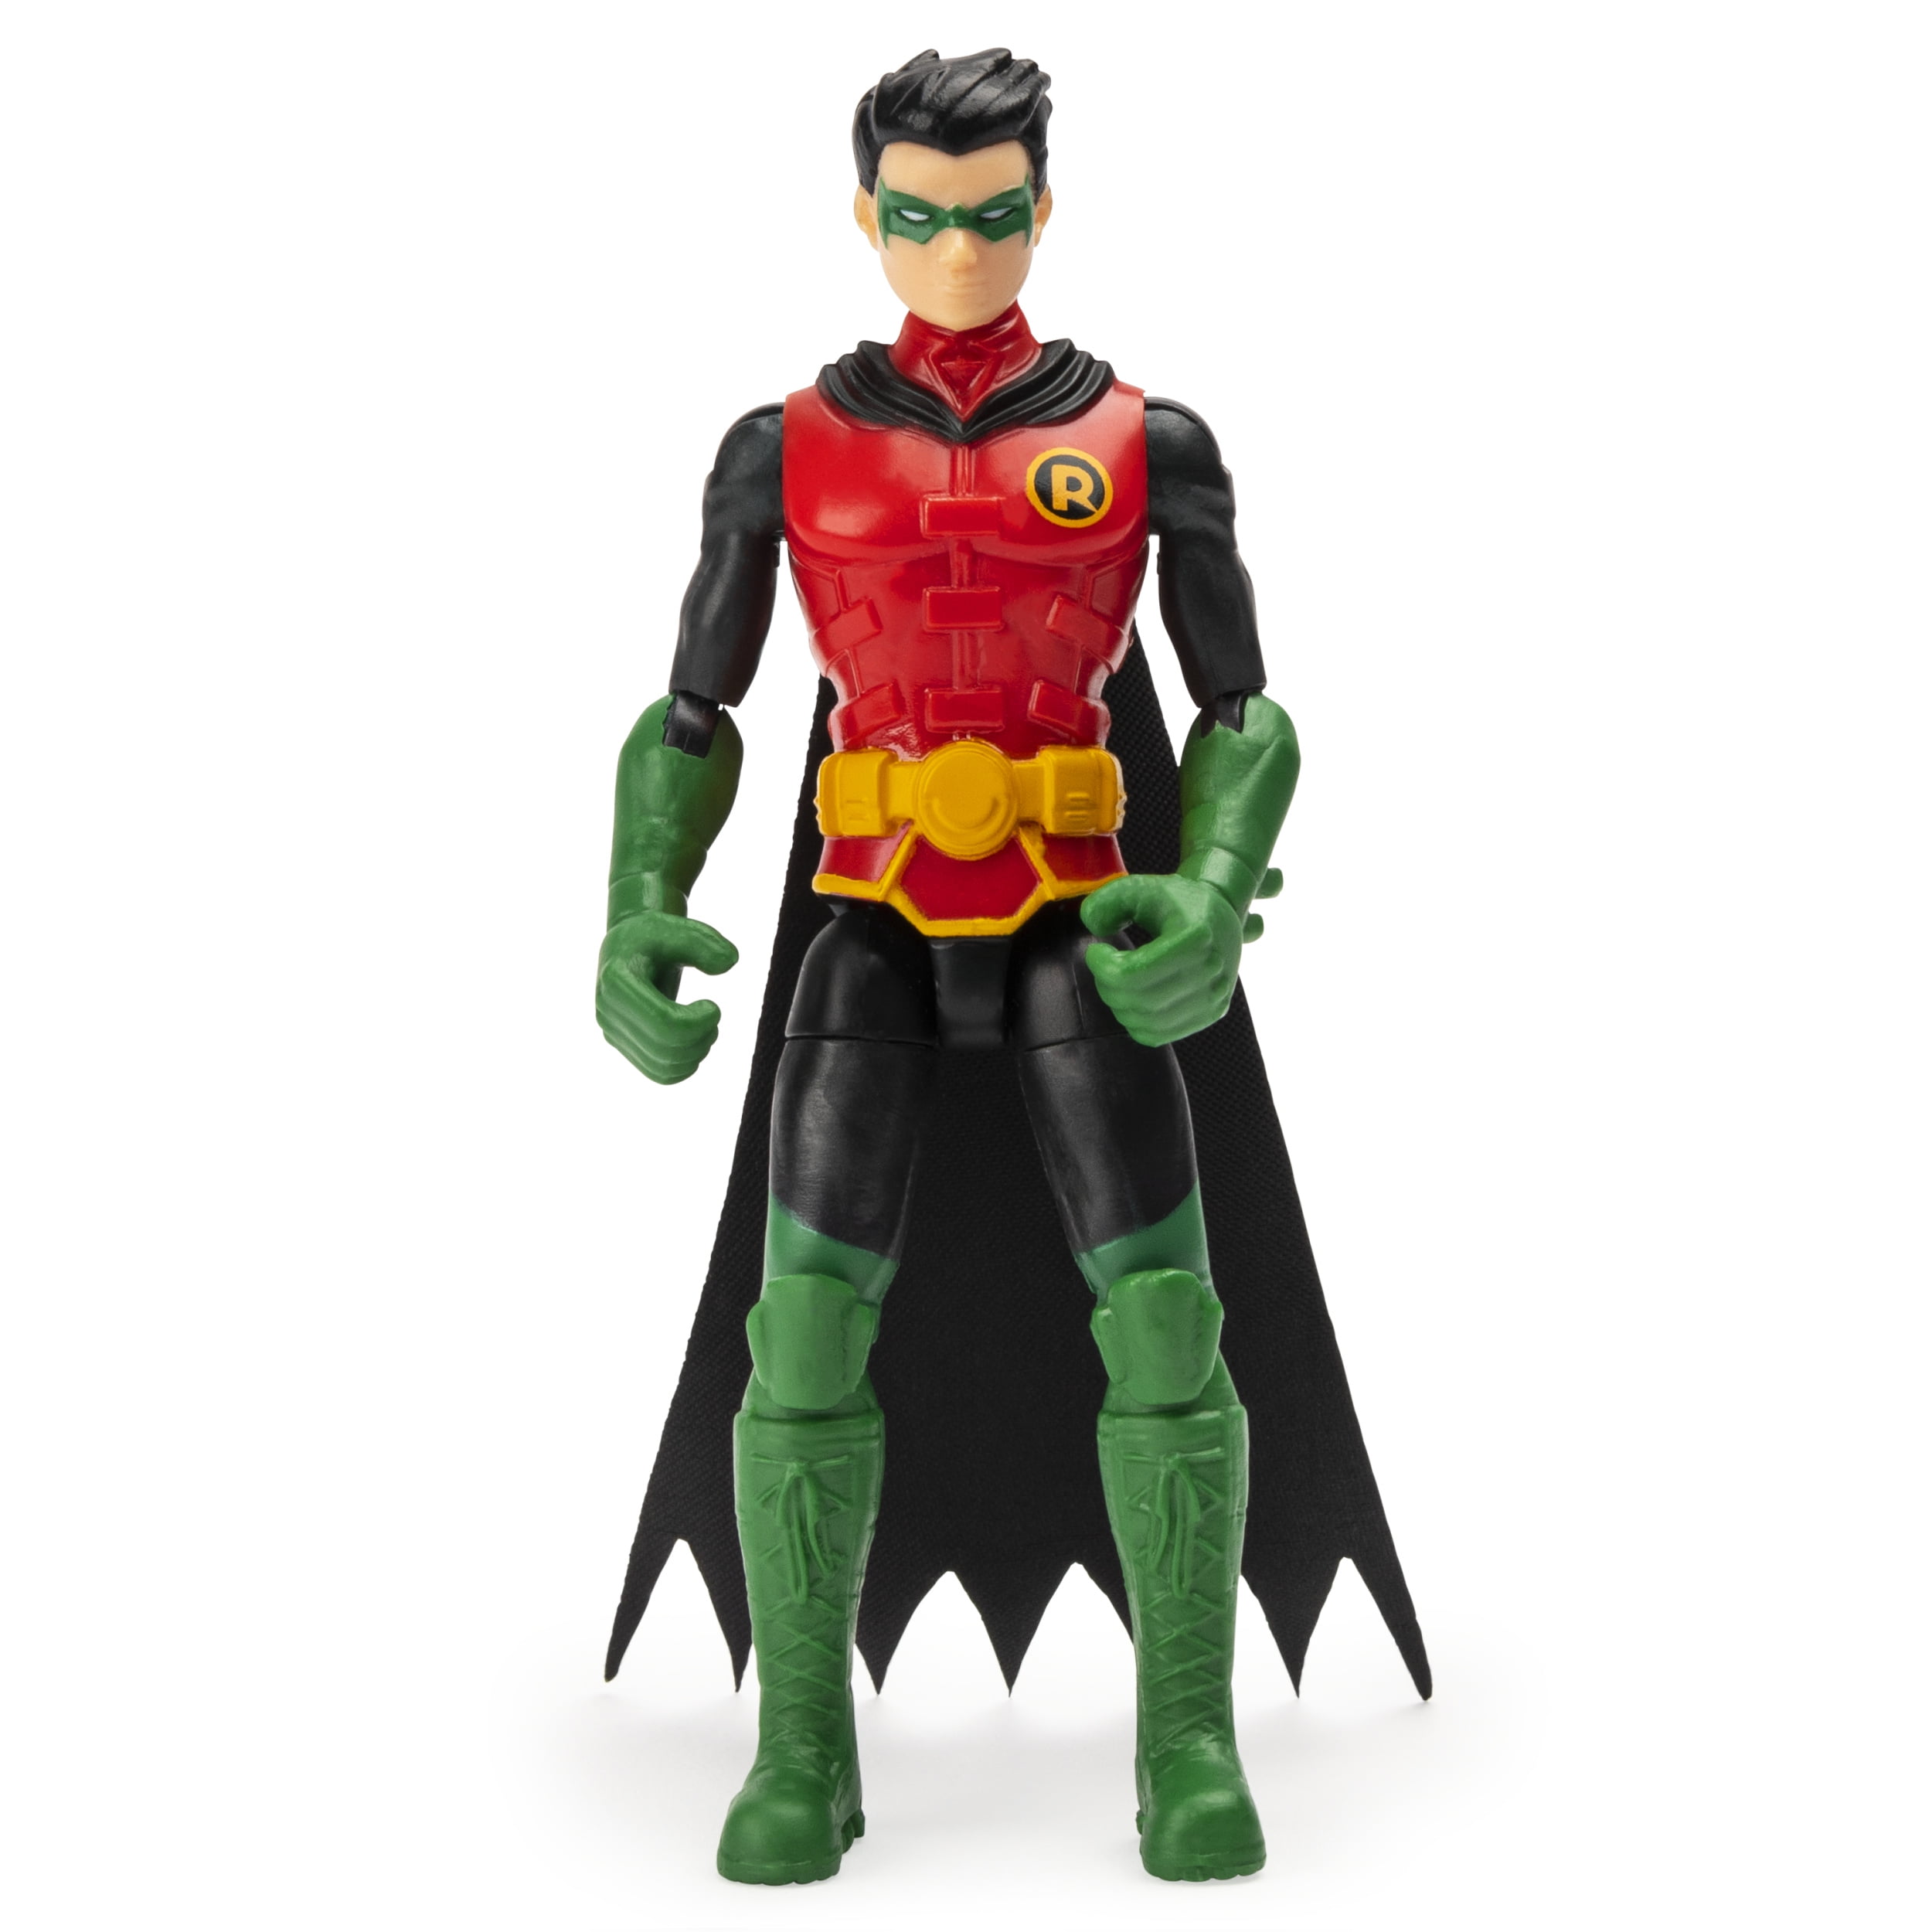 DC ROBIN Figure Batman The caped crusader 1st Edition SHIPPED =FREE IN A BOX 